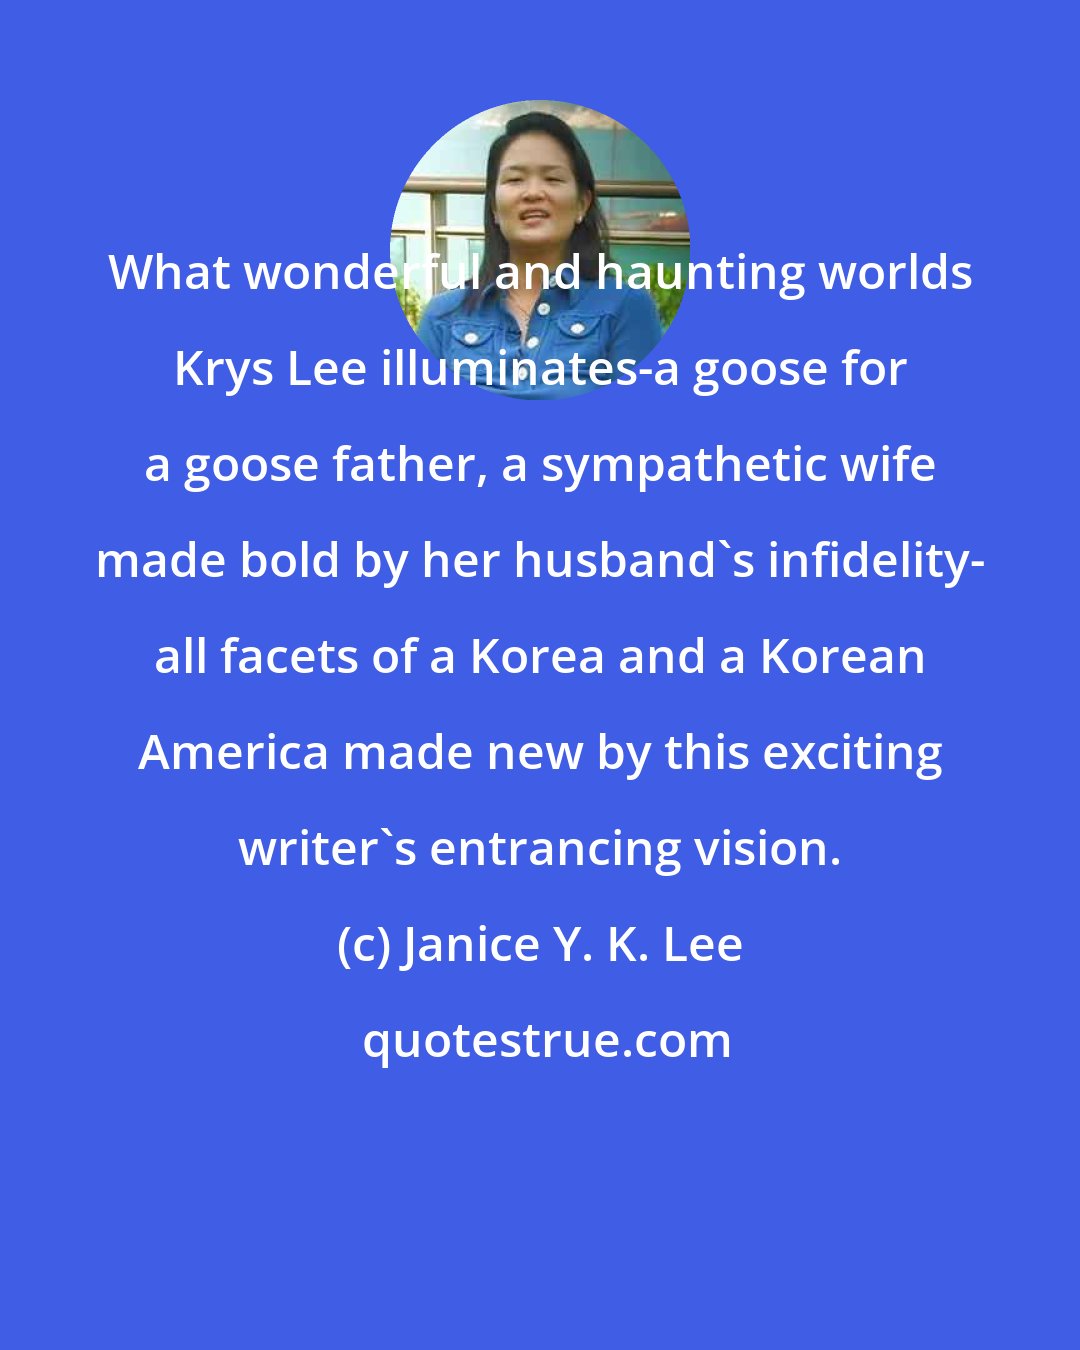 Janice Y. K. Lee: What wonderful and haunting worlds Krys Lee illuminates-a goose for a goose father, a sympathetic wife made bold by her husband's infidelity- all facets of a Korea and a Korean America made new by this exciting writer's entrancing vision.